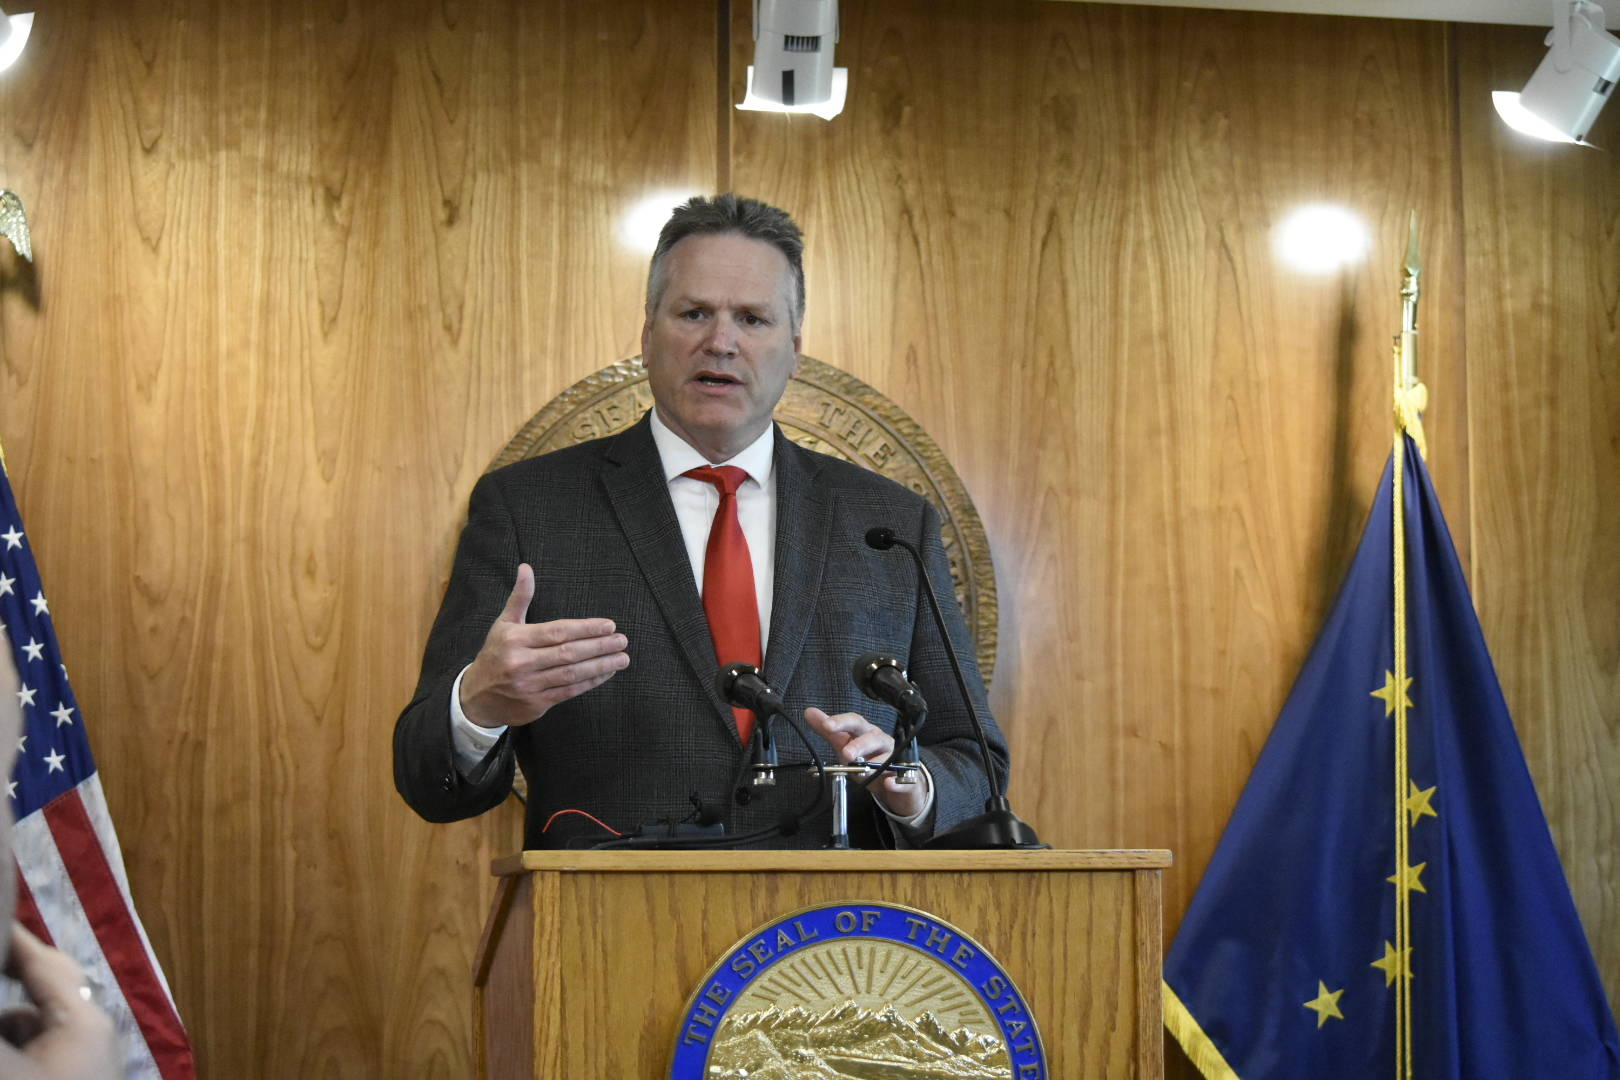 Gov. Mike Dunleavy held a press conference at the Alaska State Capitol on Thursday, June 17, 2021. (Peter Segall / Juneau Empire)